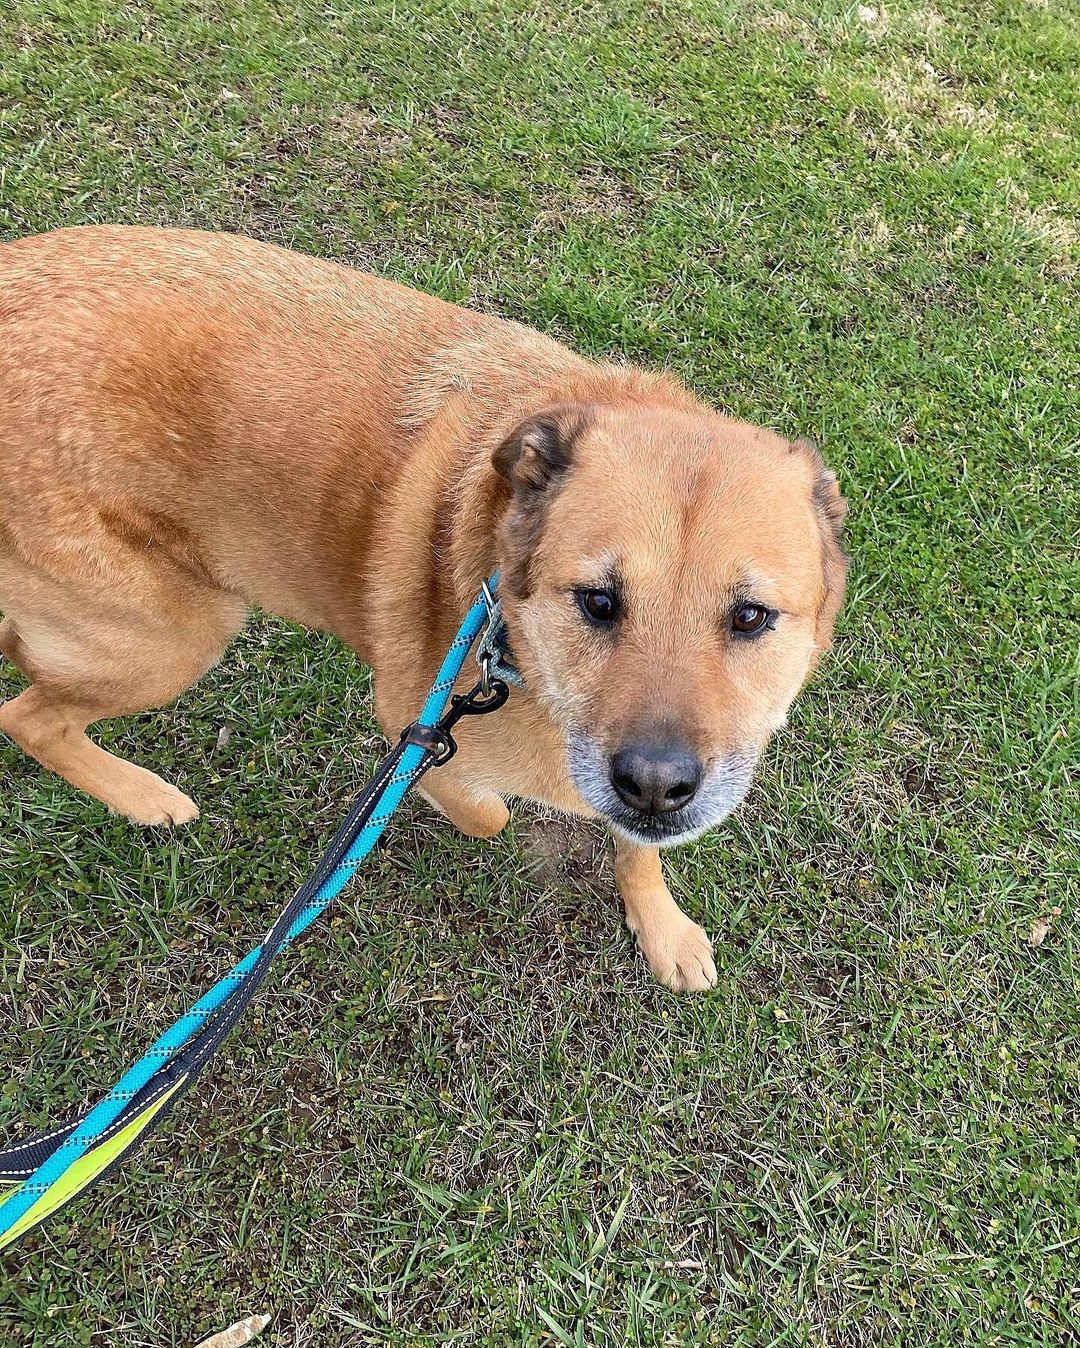 We’ve got JAMES in the building for our <a target='_blank' href='https://www.instagram.com/explore/tags/SeniorSunday/'>#SeniorSunday</a> breakdown!
Oooooh, look at this salt & pepper boy. James is a ten-year-old Shepard mix with a laid-back disposition and fox-like tail. He enjoys the little things like leisurely walks, sniffing the air, taking in his surroundings, and rainy days where he can feel the raindrops on his fur.

James’ love language is Quality Time -- One on one time spent together; sharing experiences as an expression of love. He wants to be a companion so badly. He wants to lay by your feet while you read the newspaper. He wants you to smile when you hear the sound of his tail slapping against the sofa when you come home from work. He wants to remind you to take a break from life and go for a walk in the crisp afternoon air. He wants to be your best bud. 

James is a loving, loyal, handsome pet who walks well on a leash, does well with other large dogs, and needs a home. So if you’re looking for a solid, reliable, always-happy-to-see-you, best friend kind of dog… then there is no better than James. 

And remember, November is <a target='_blank' href='https://www.instagram.com/explore/tags/SeniorMonth/'>#SeniorMonth</a>, and @stellaandchewys is covering all adoption fees for senior dogs. Let’s get James <a target='_blank' href='https://www.instagram.com/explore/tags/HomeForTheHolidays/'>#HomeForTheHolidays</a>

One of the best perks of adopting a senior (besides unbridled adoration) is that they already have a complete set of manners like housetraining and knowing boundaries. 

For more info or to apply to adopt James, please visit us at NYCSecondChanceRescue.org
 <a target='_blank' href='https://www.instagram.com/explore/tags/BecauseTheyMatter/'>#BecauseTheyMatter</a>